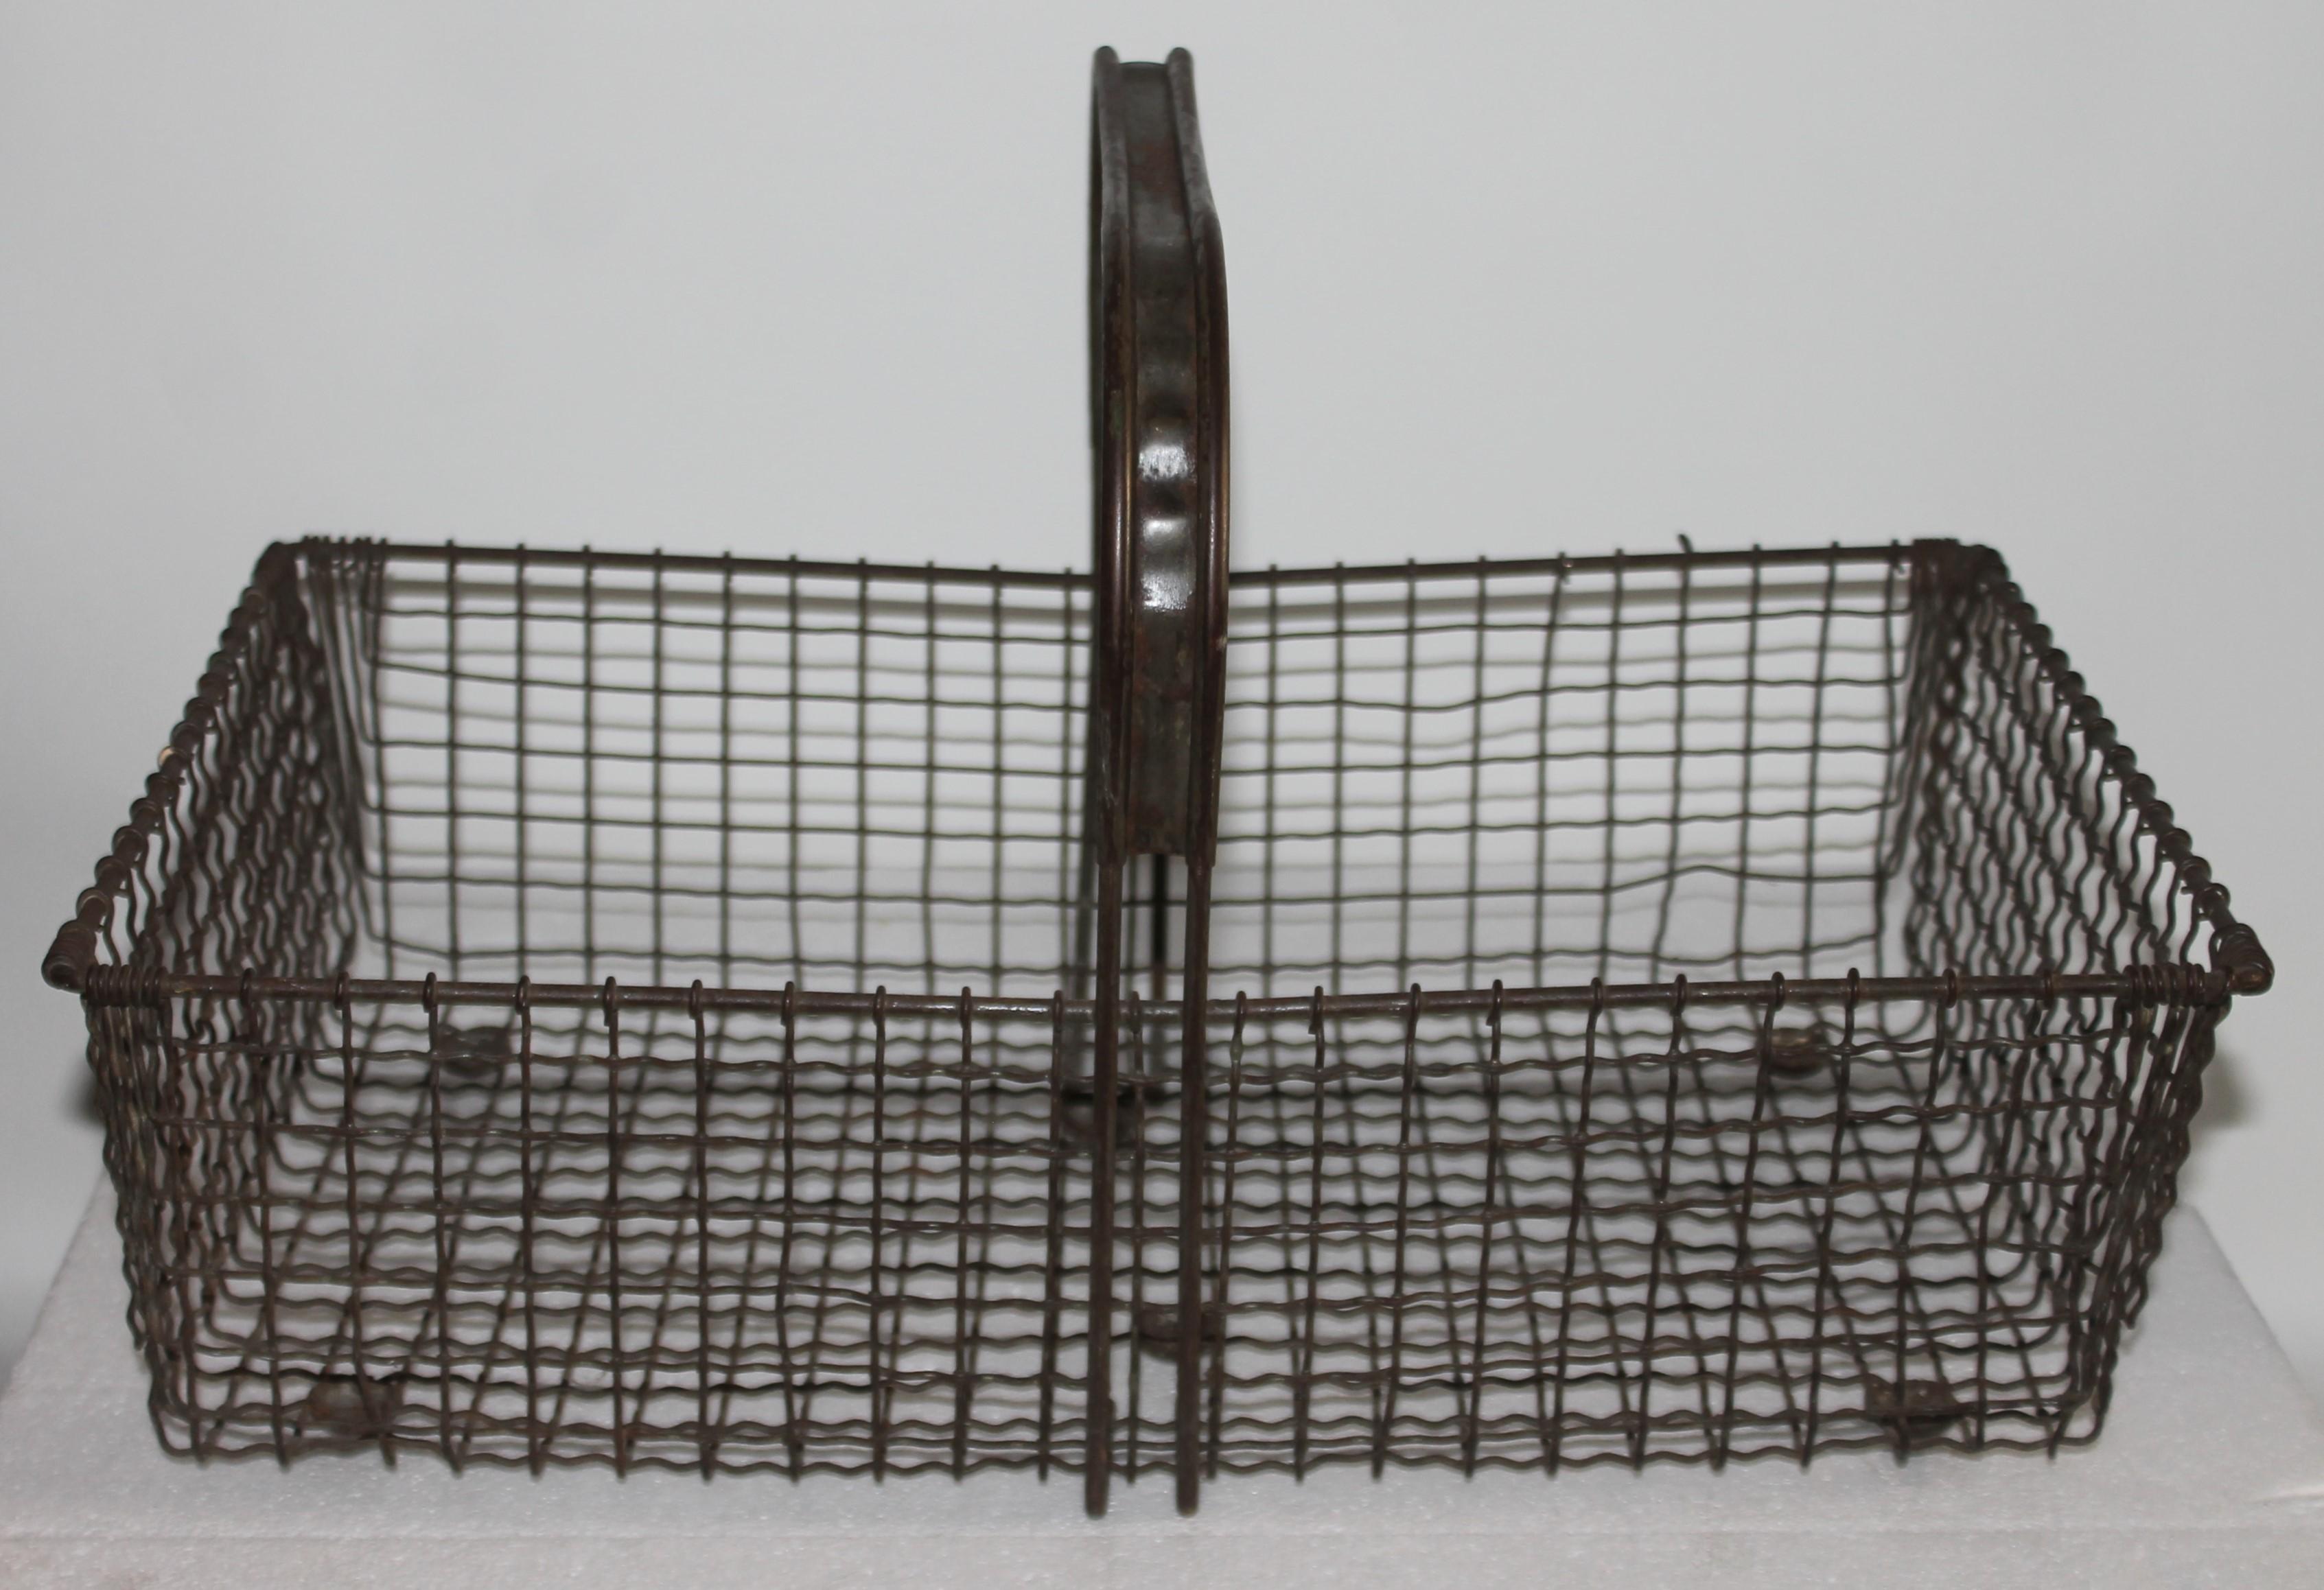 This fantastic wire veggy basket could be for shopping at the farmers market or gathering vegetables in the fields. It is in great condition.